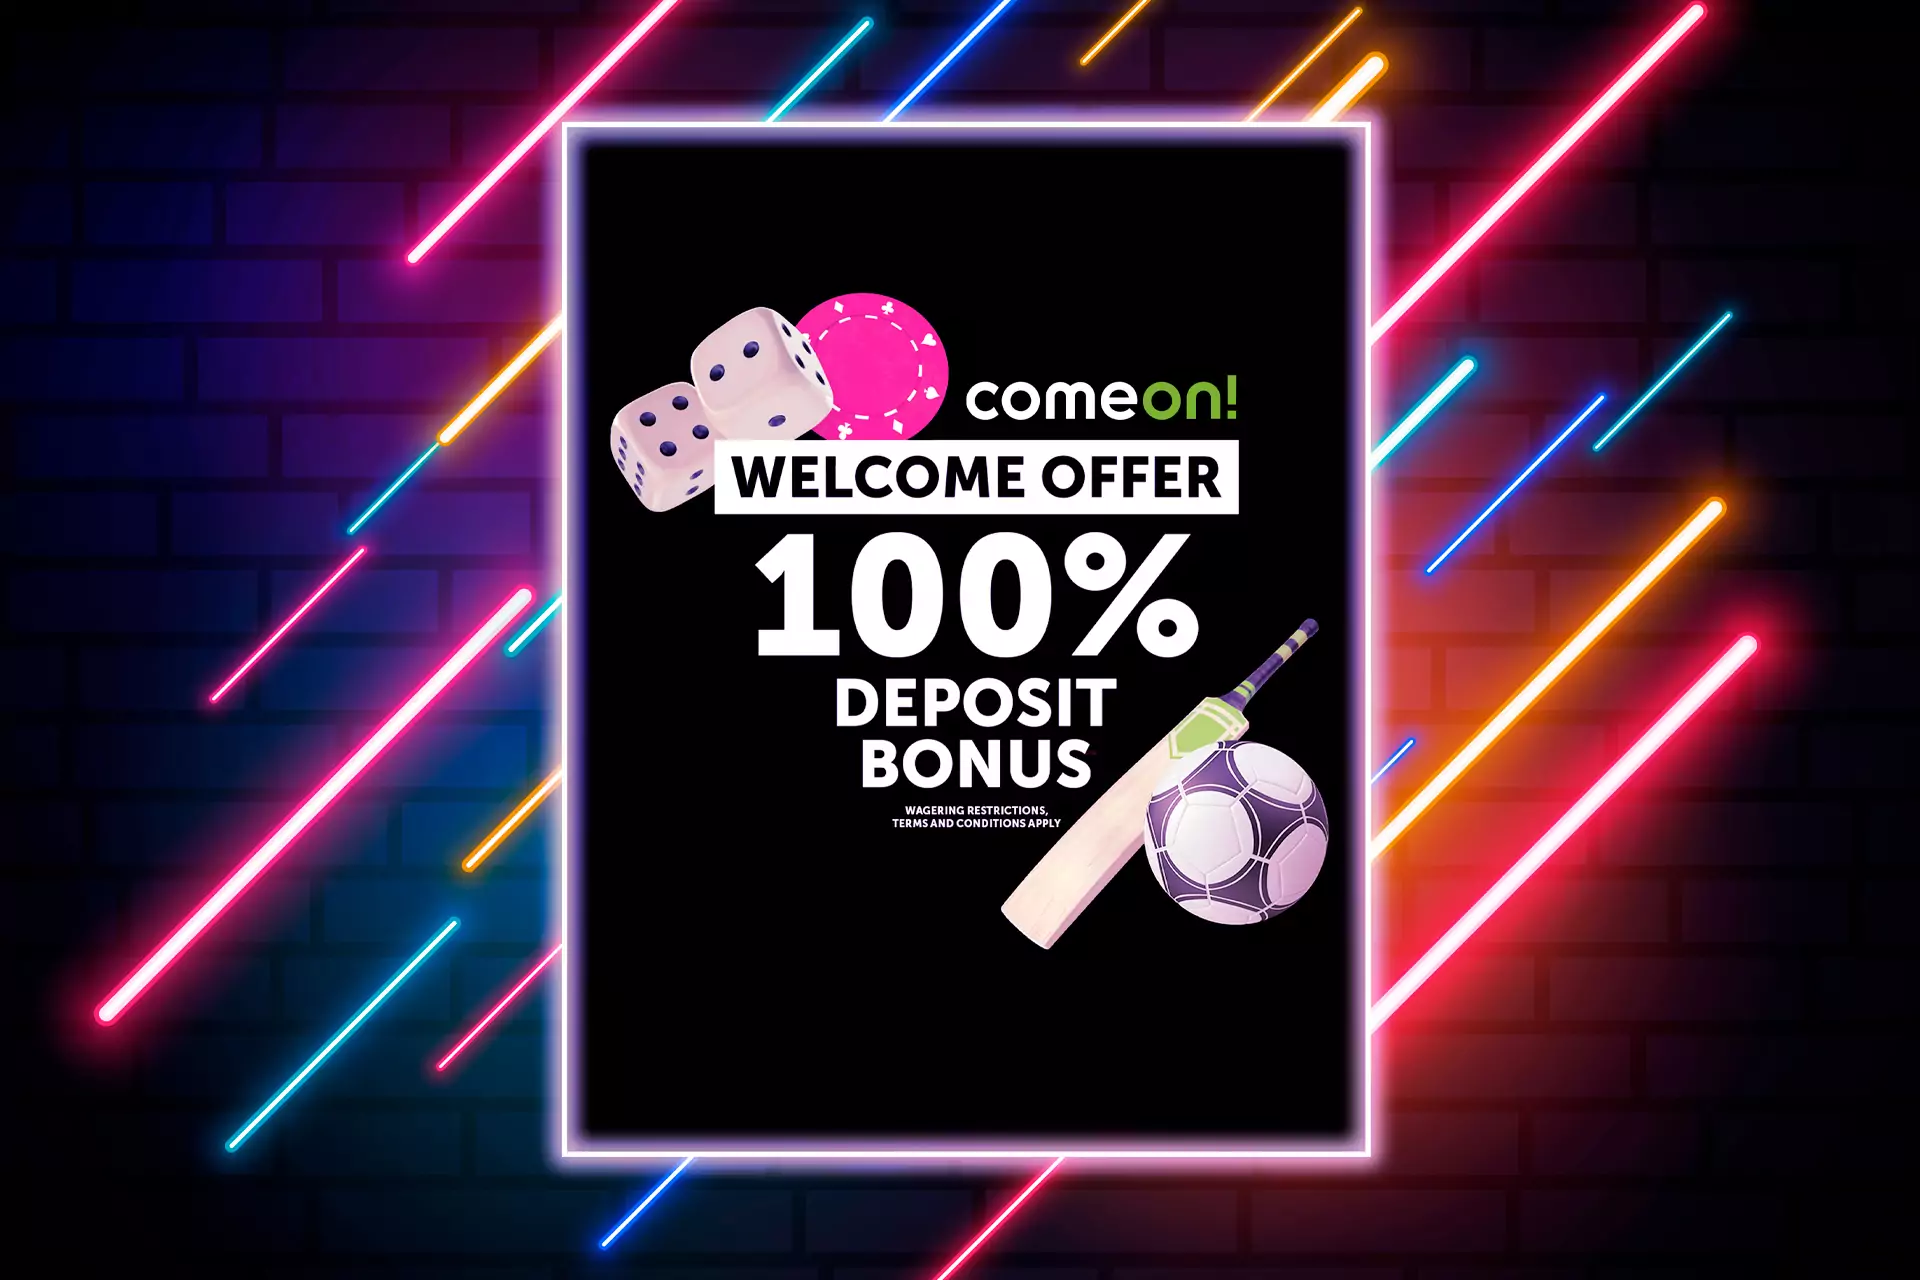 For new users, there is a generous welcome offer with a 100% deposit bonus.